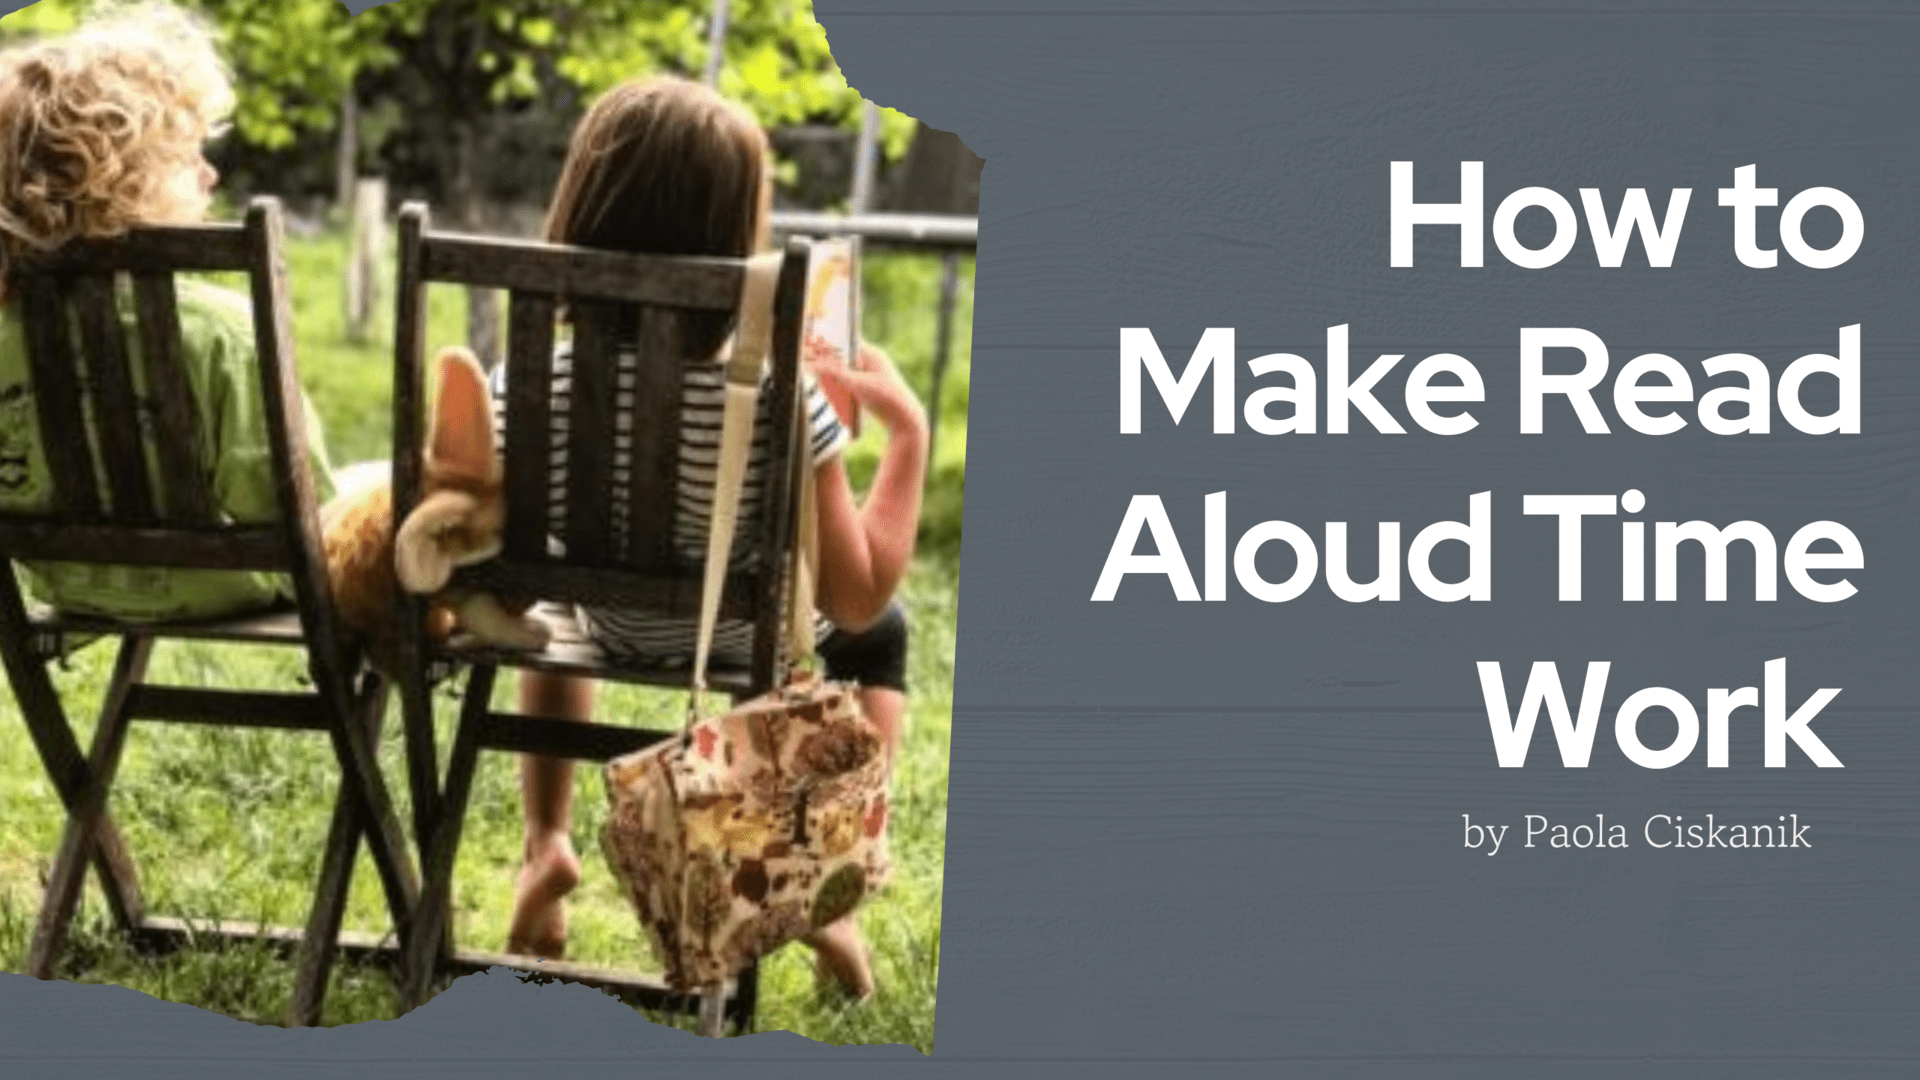 How to Make Read Aloud Time Work